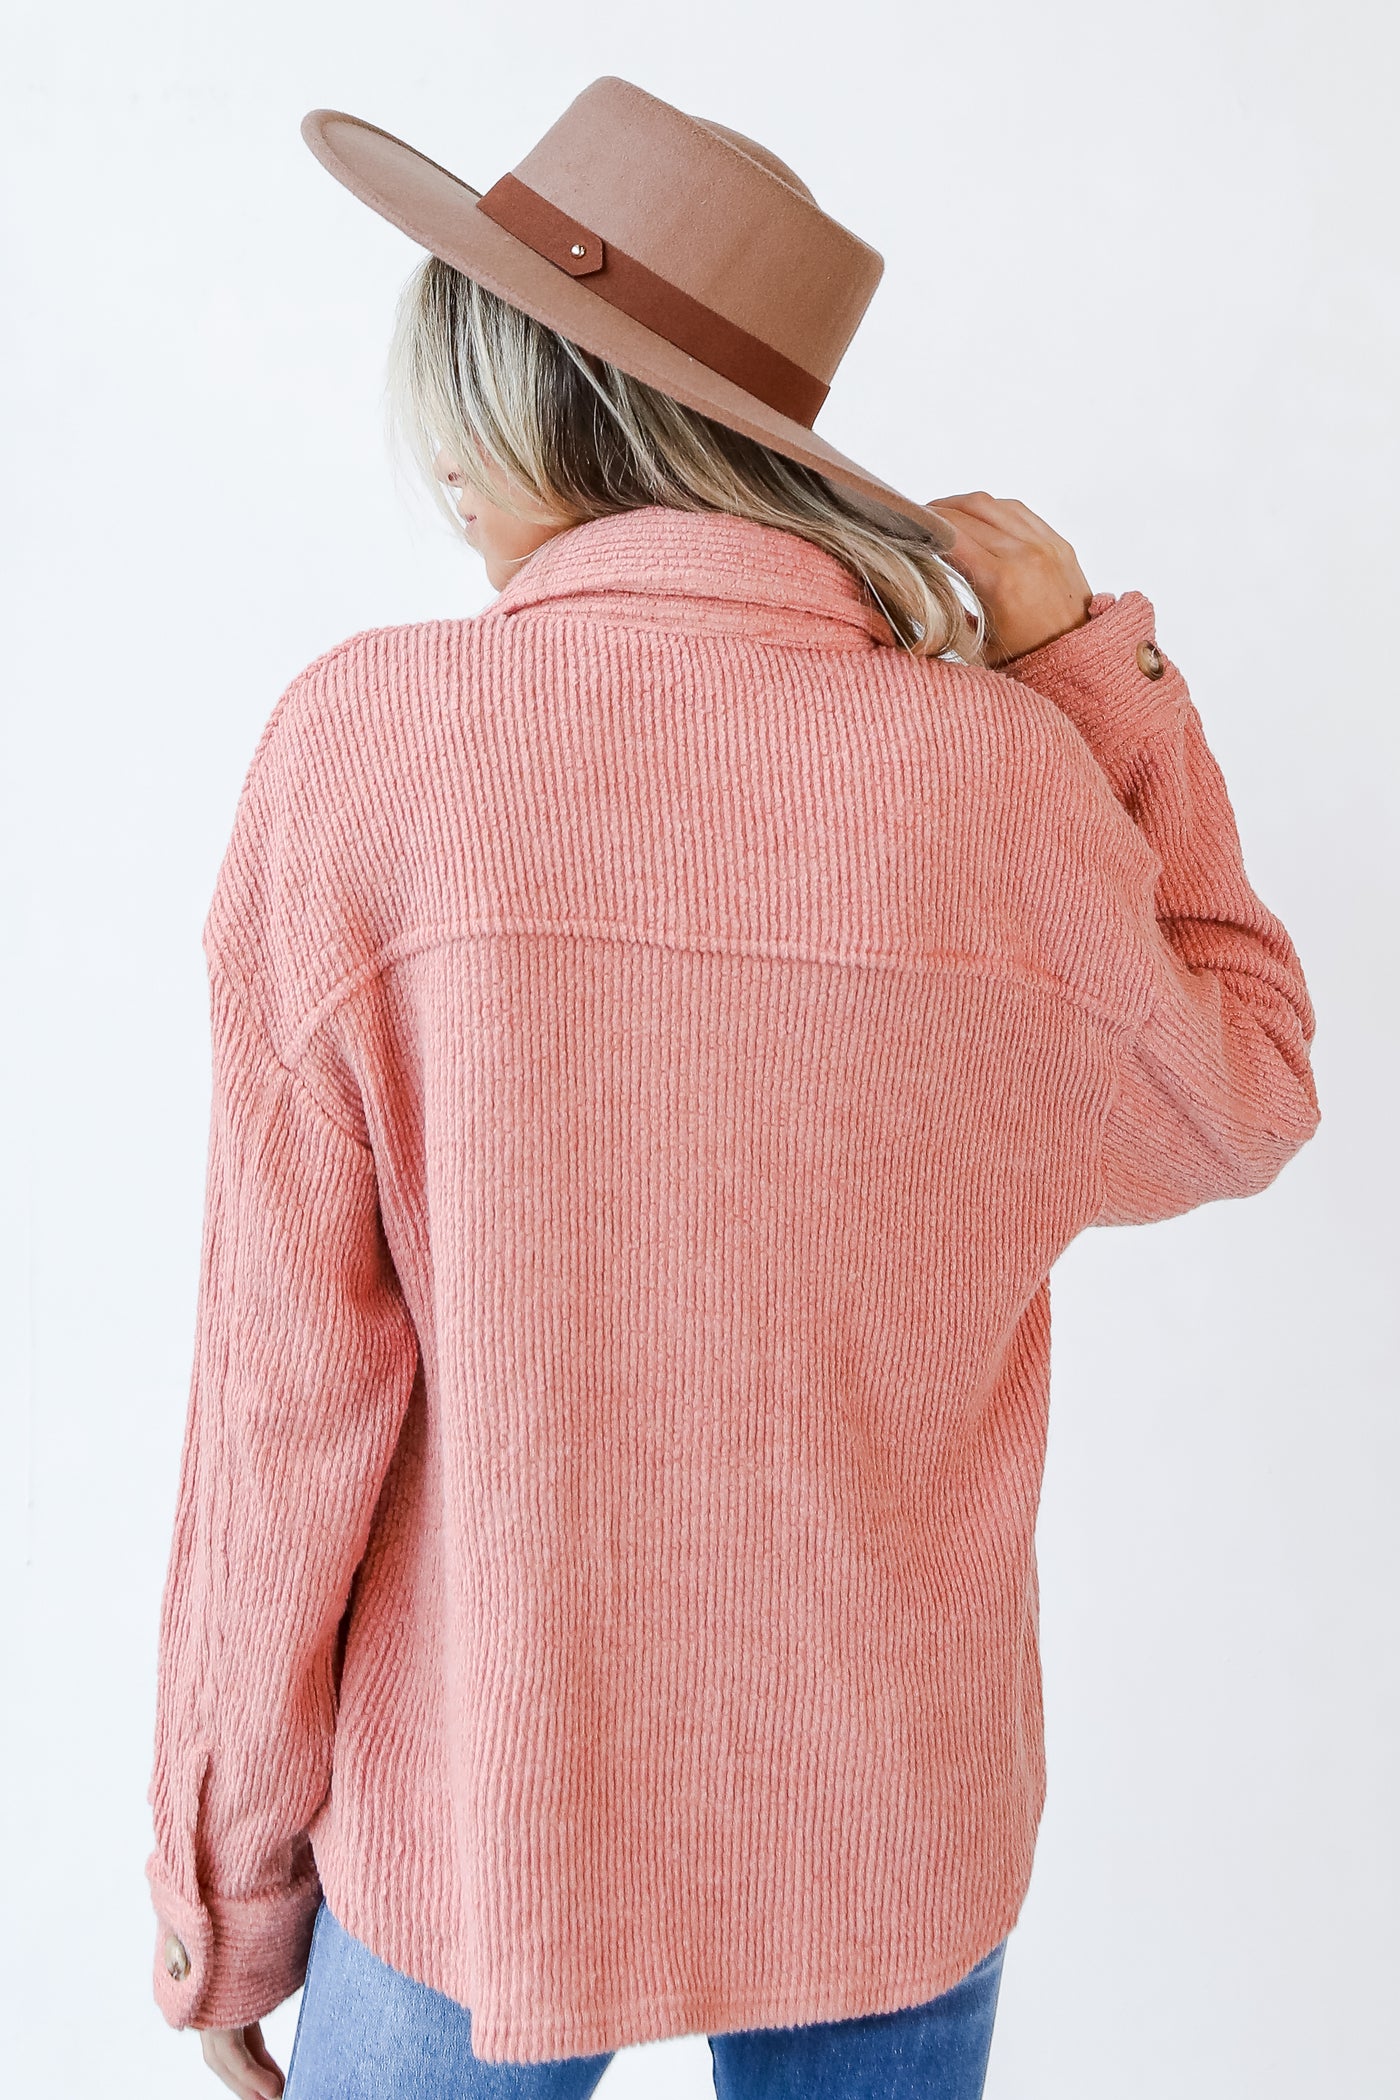 Corded Shacket in blush back view